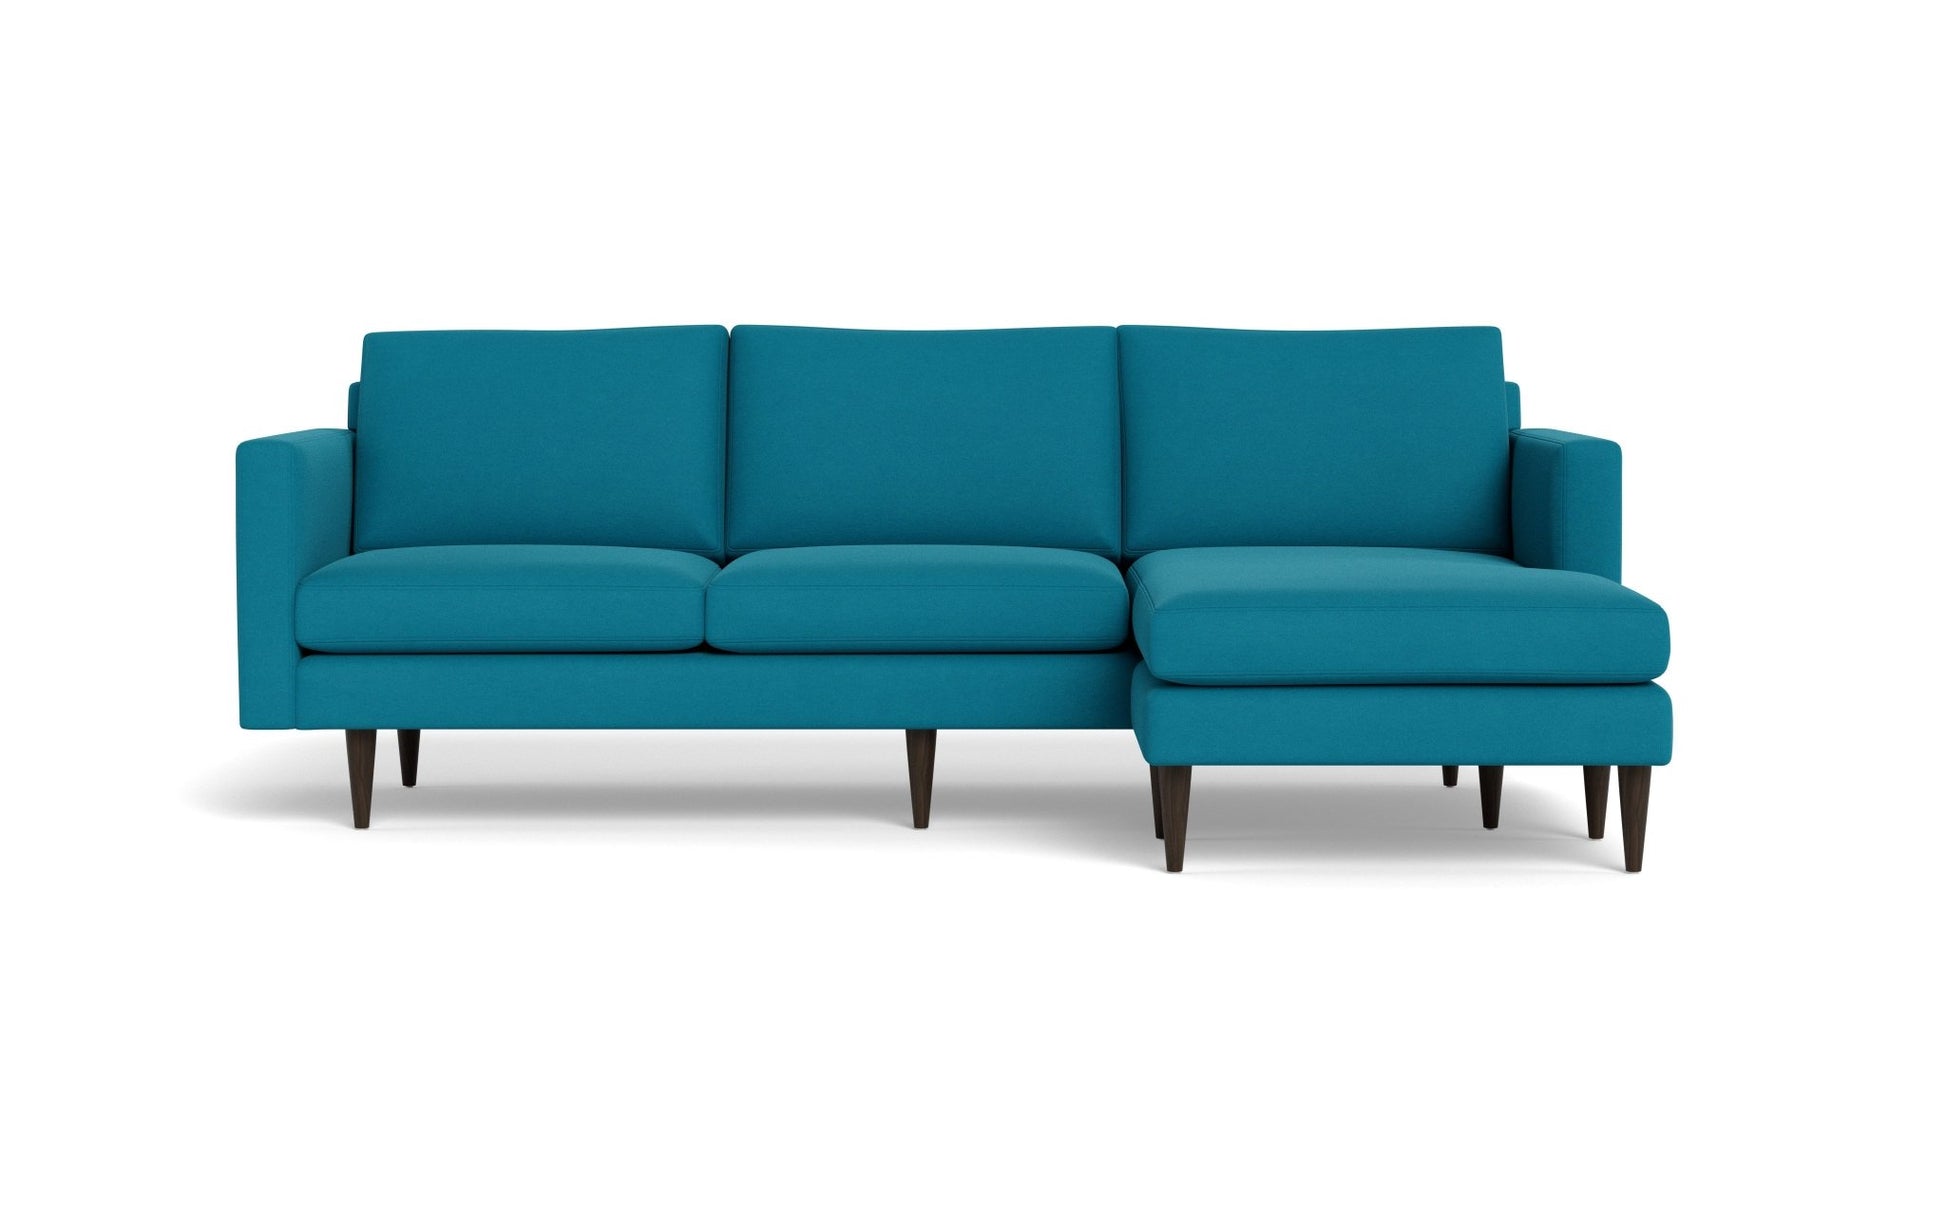 Wallace Untufted Reversible Chaise Sofa - Bella Peacock